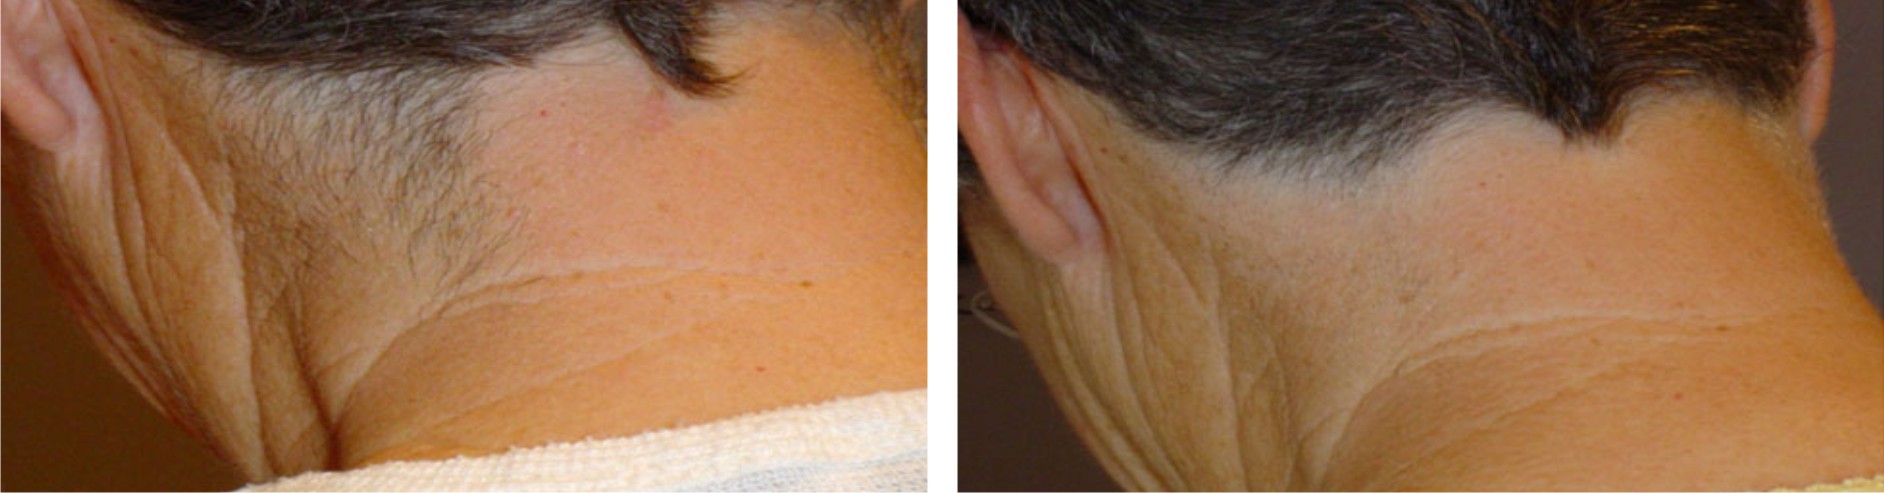 Laser Hair Removal Image Two